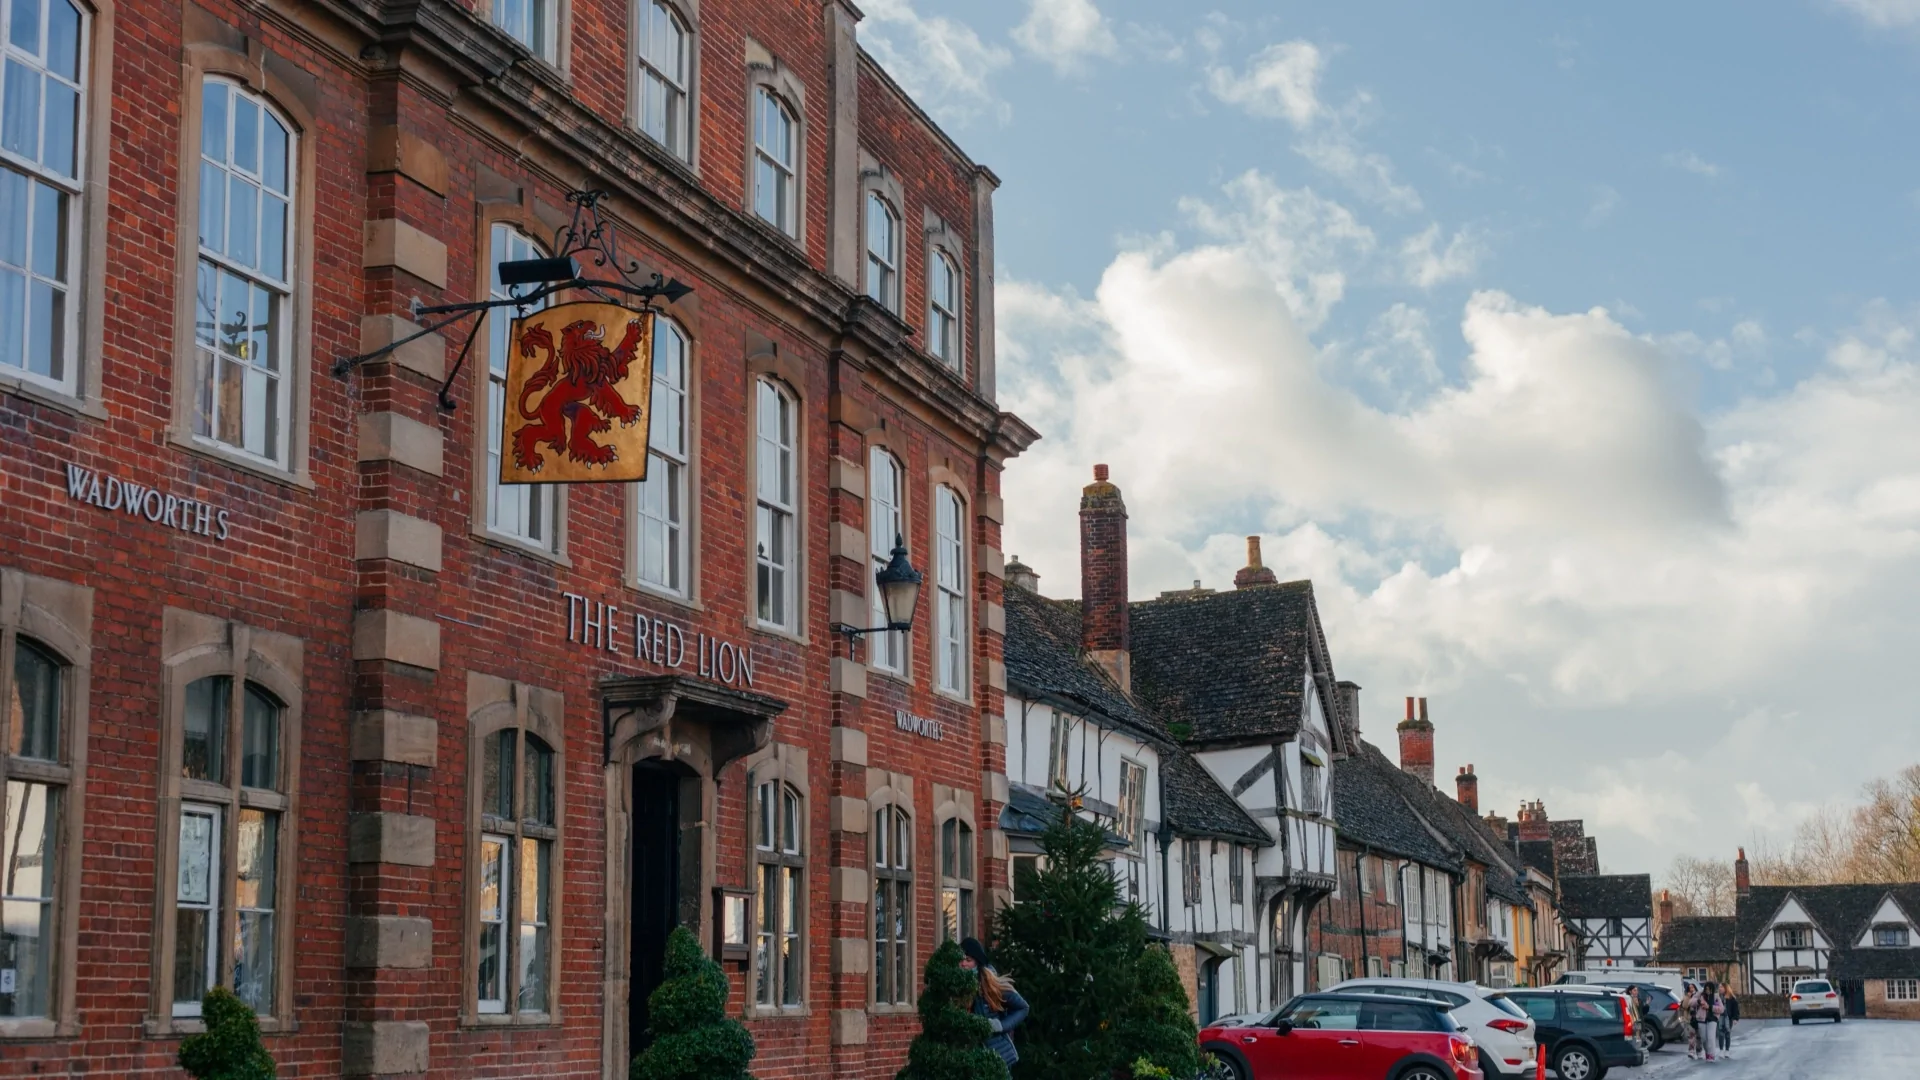 The Red Lion pub is positioned on the left-hand side of the frame where a gold sign with a red lion on the facade. On the right a street with cars and old houses till the end of the frame.